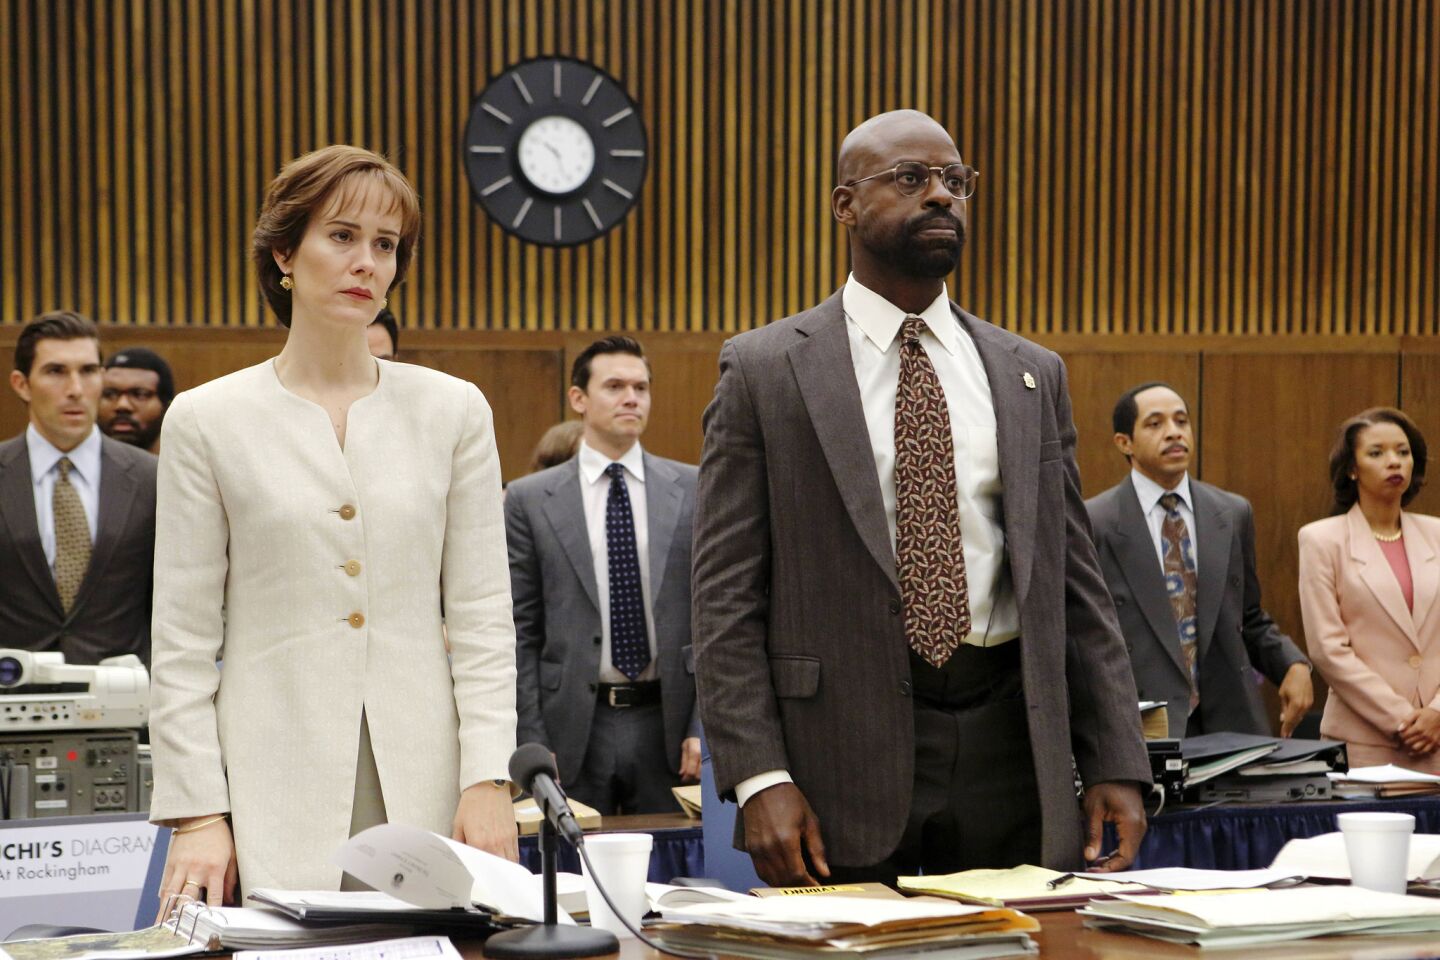 'The People v. O.J. Simpson: American Crime Story'